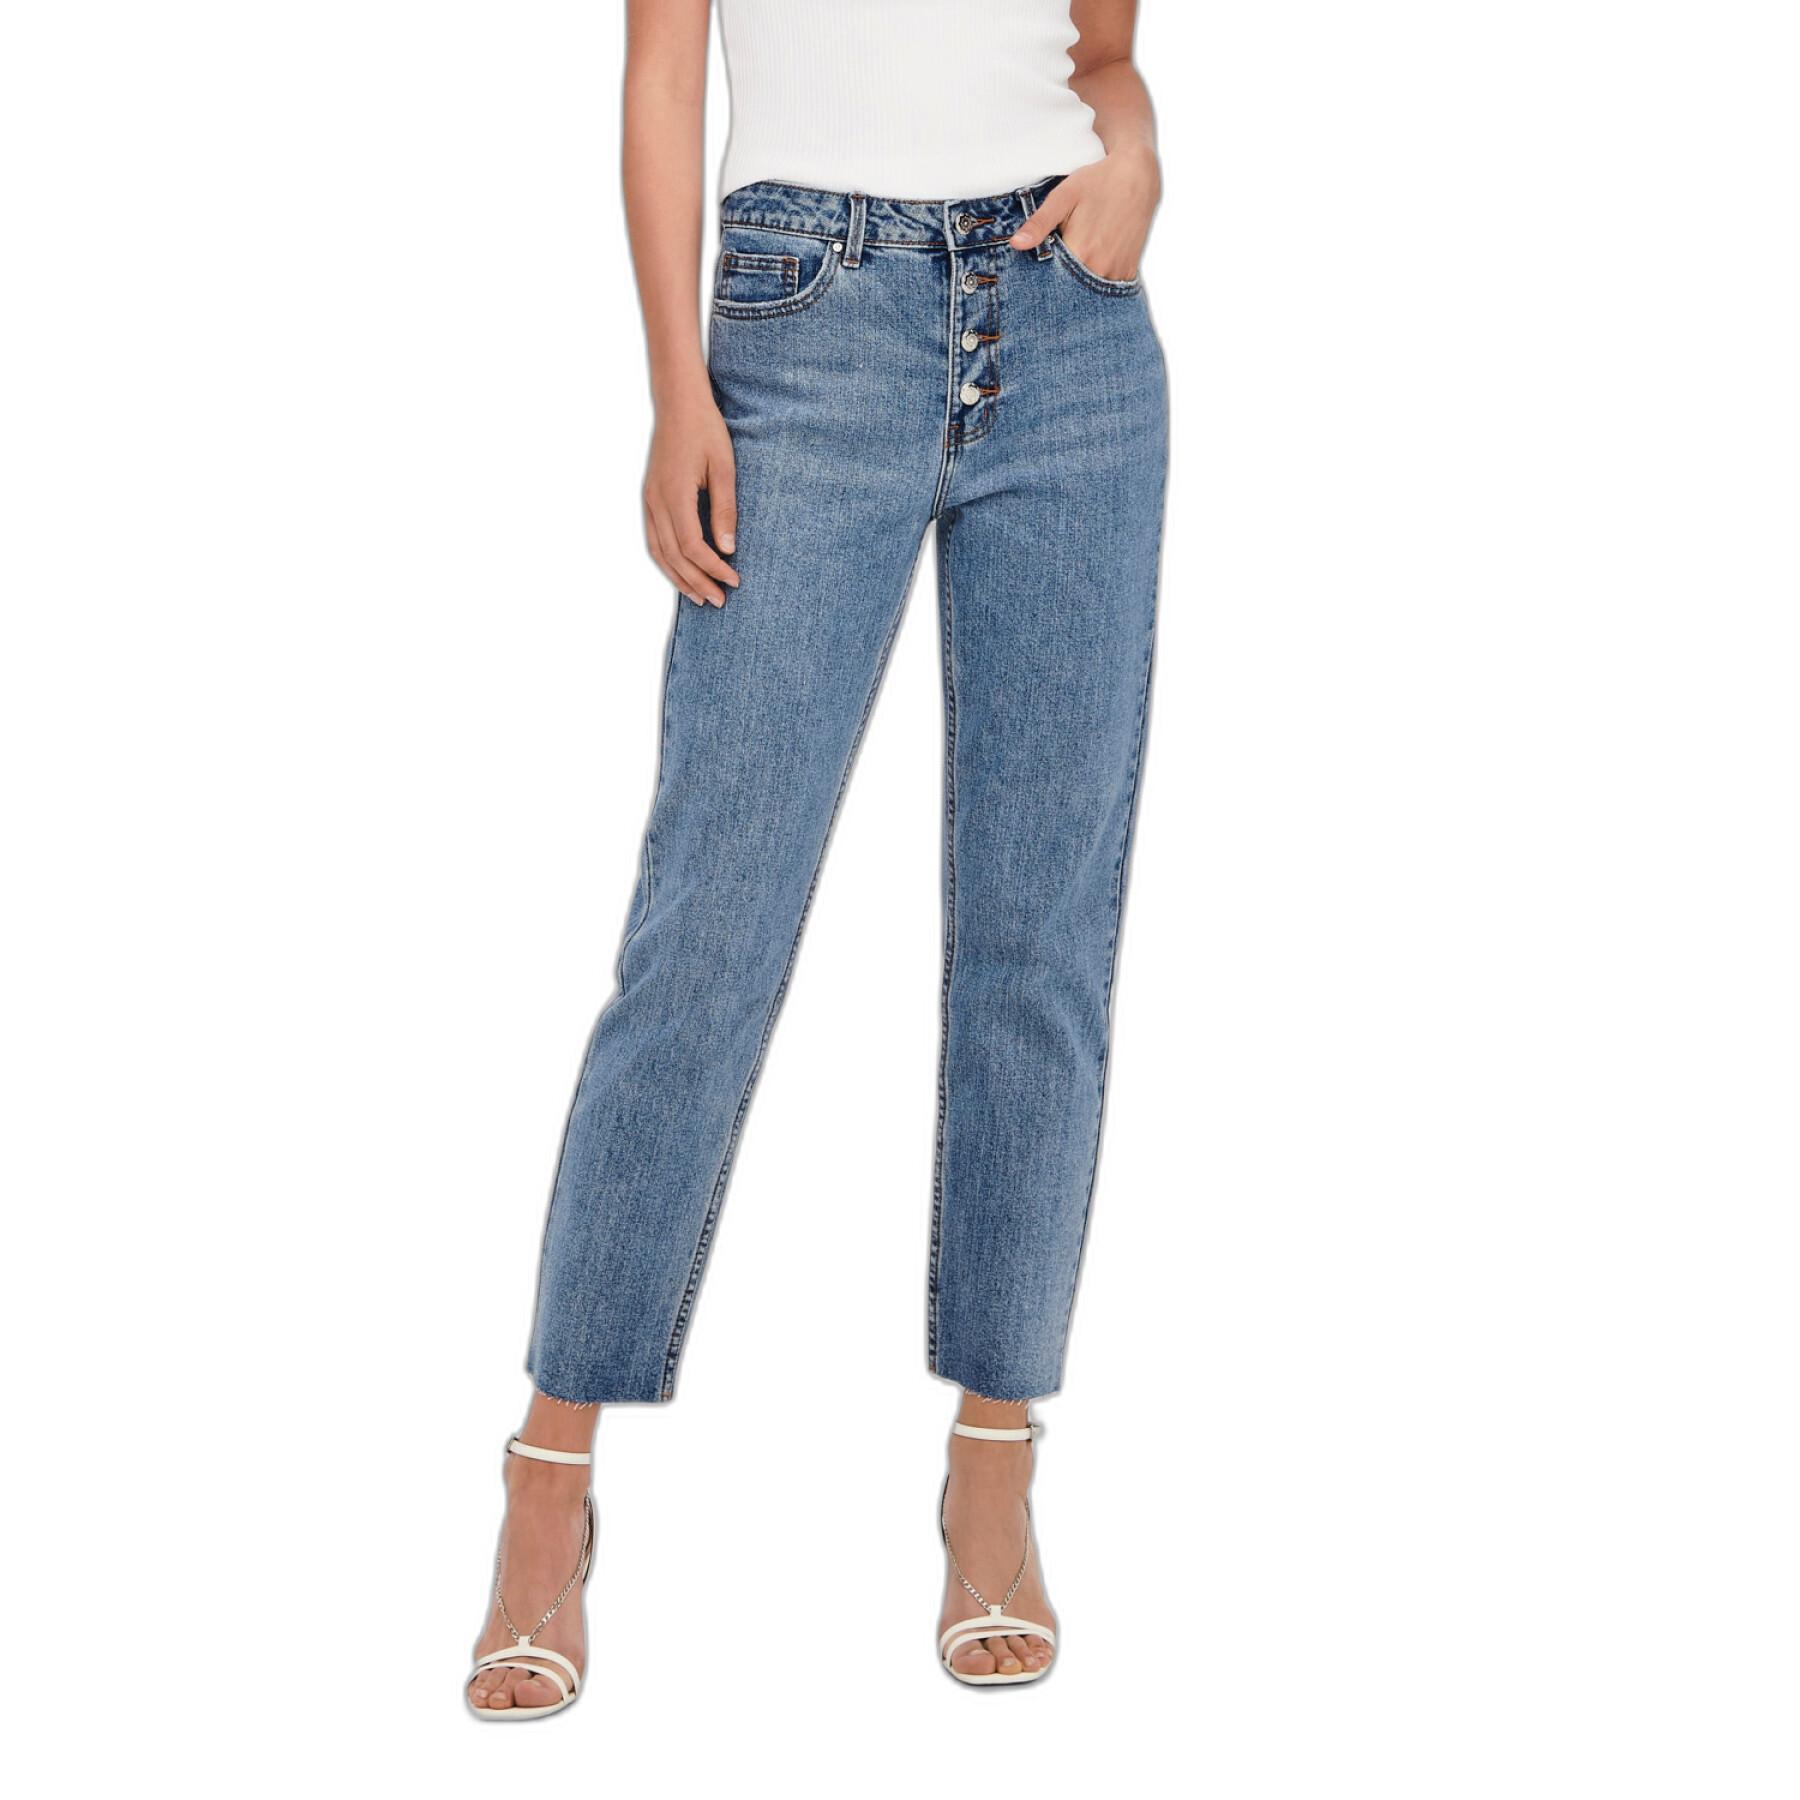 Women's jeans Only Onlemily mae06